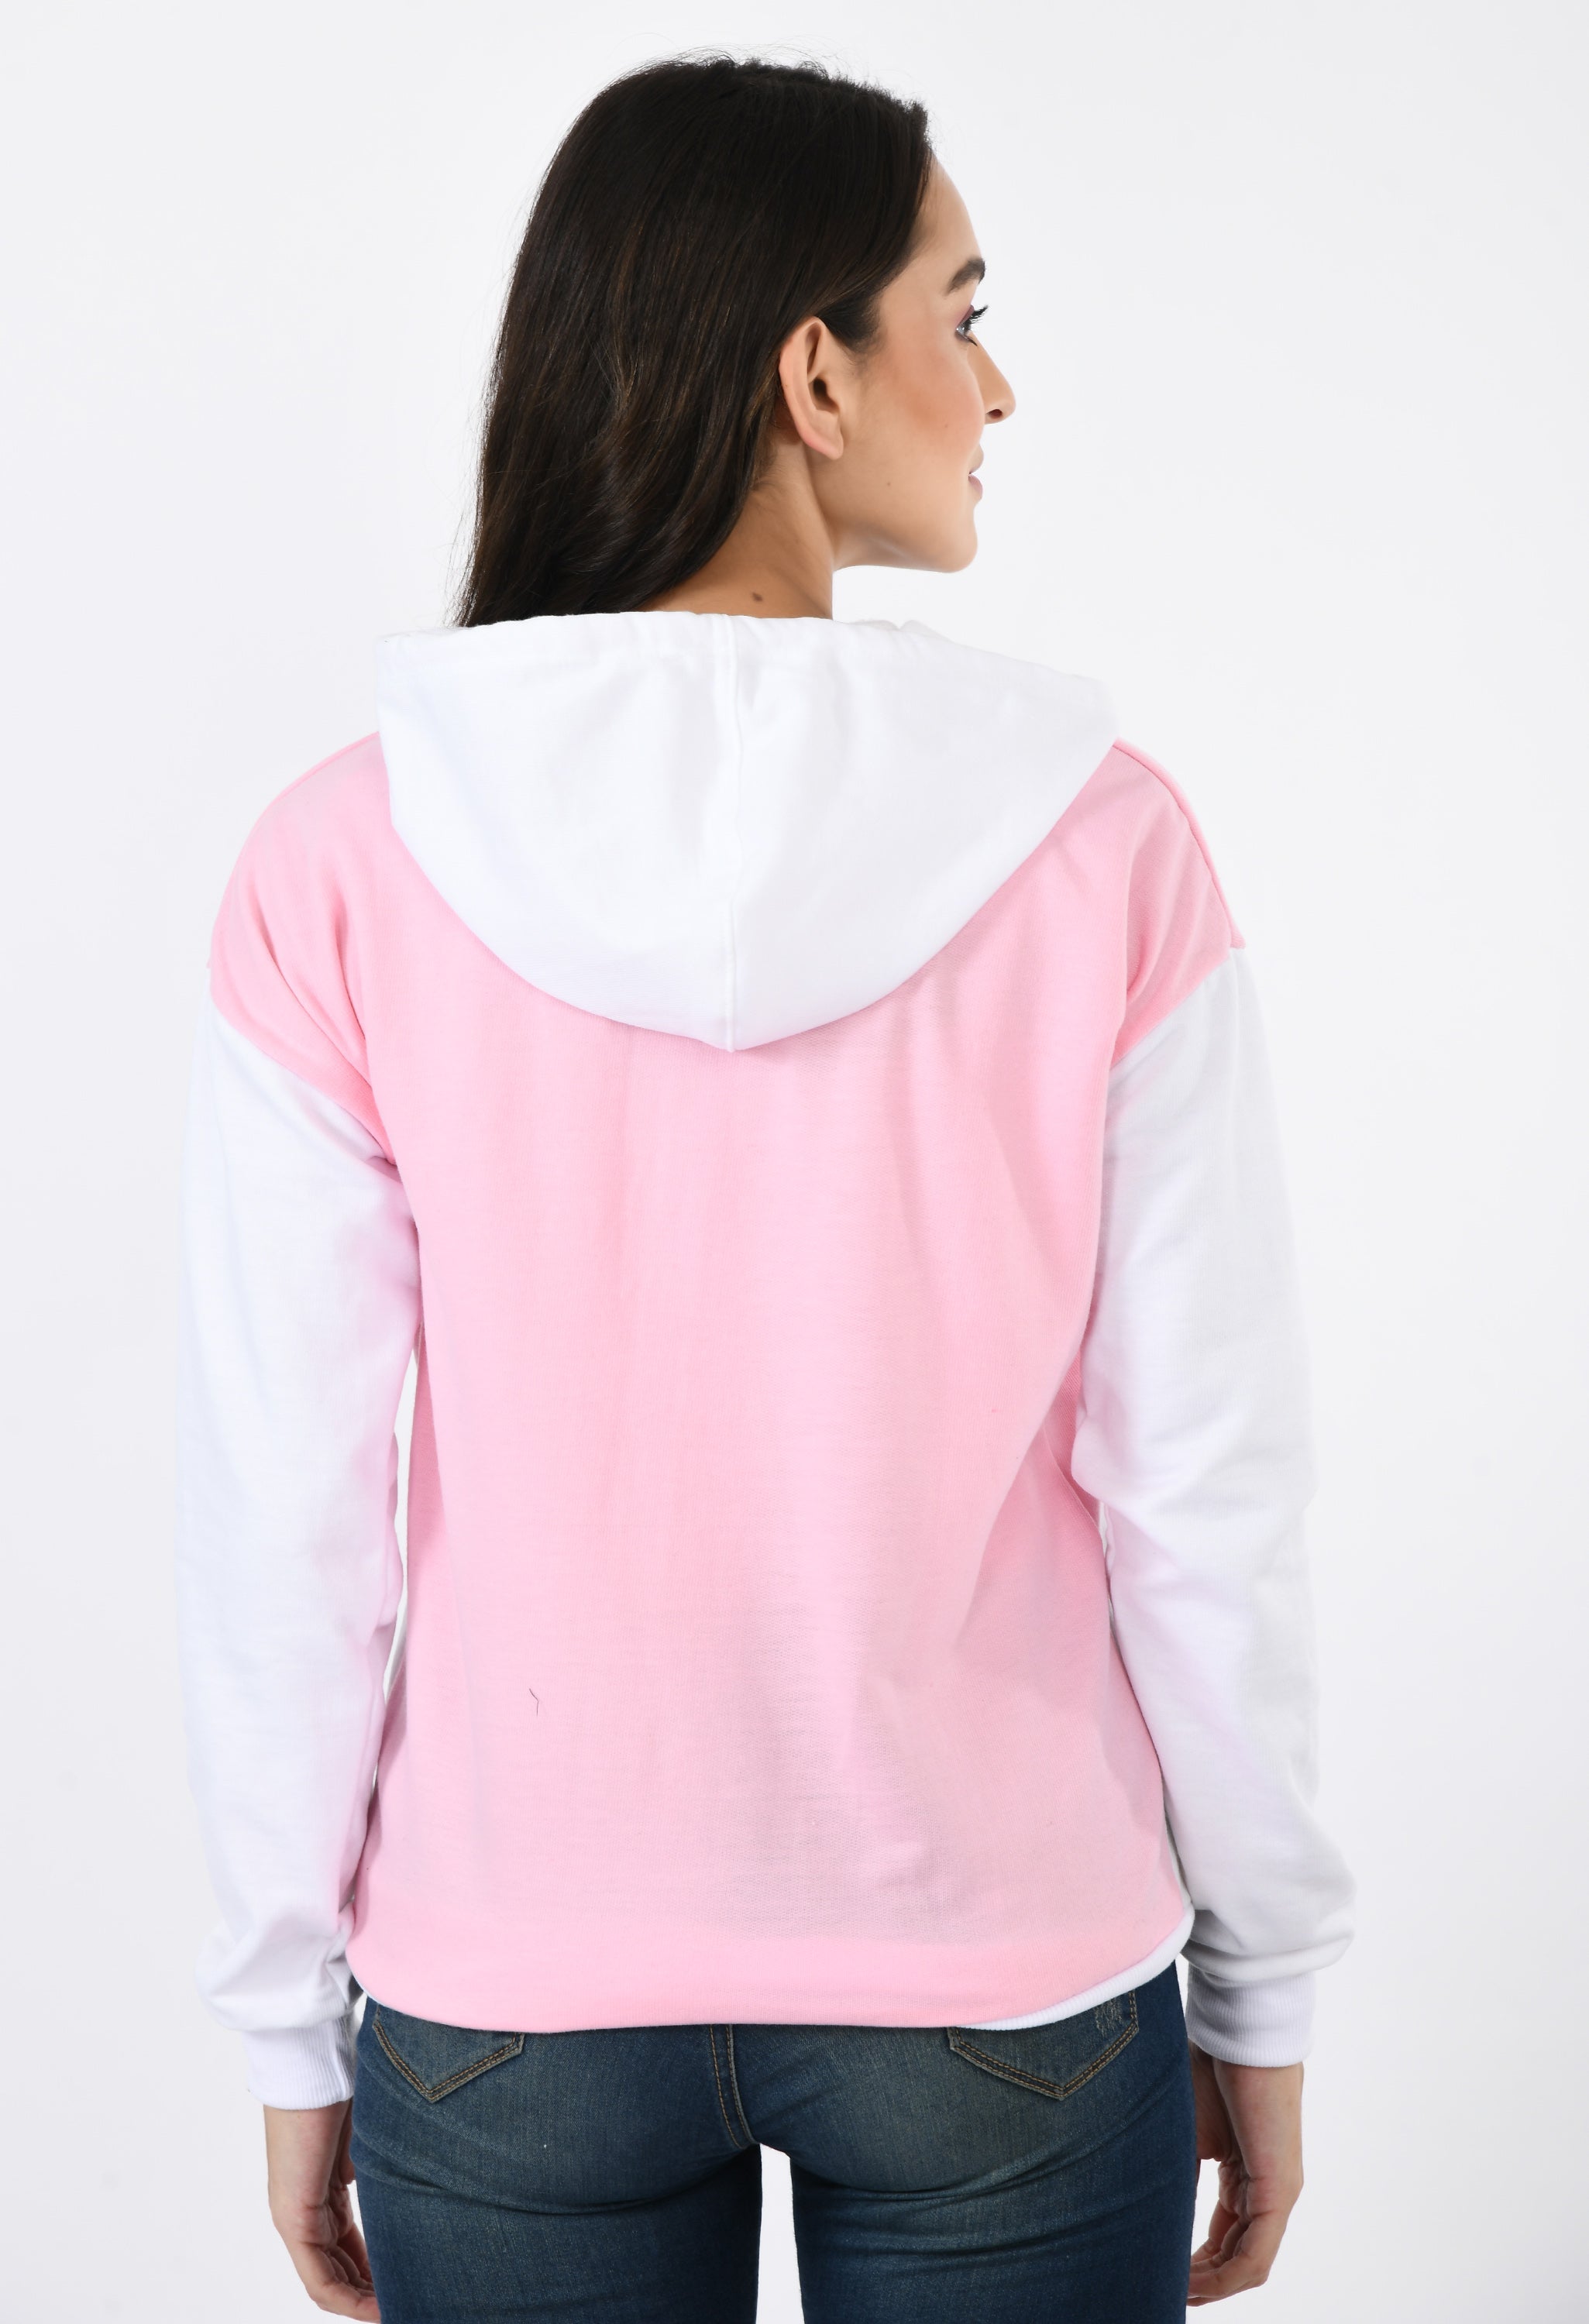 Adorable Cat Ear Hoodie For Girls